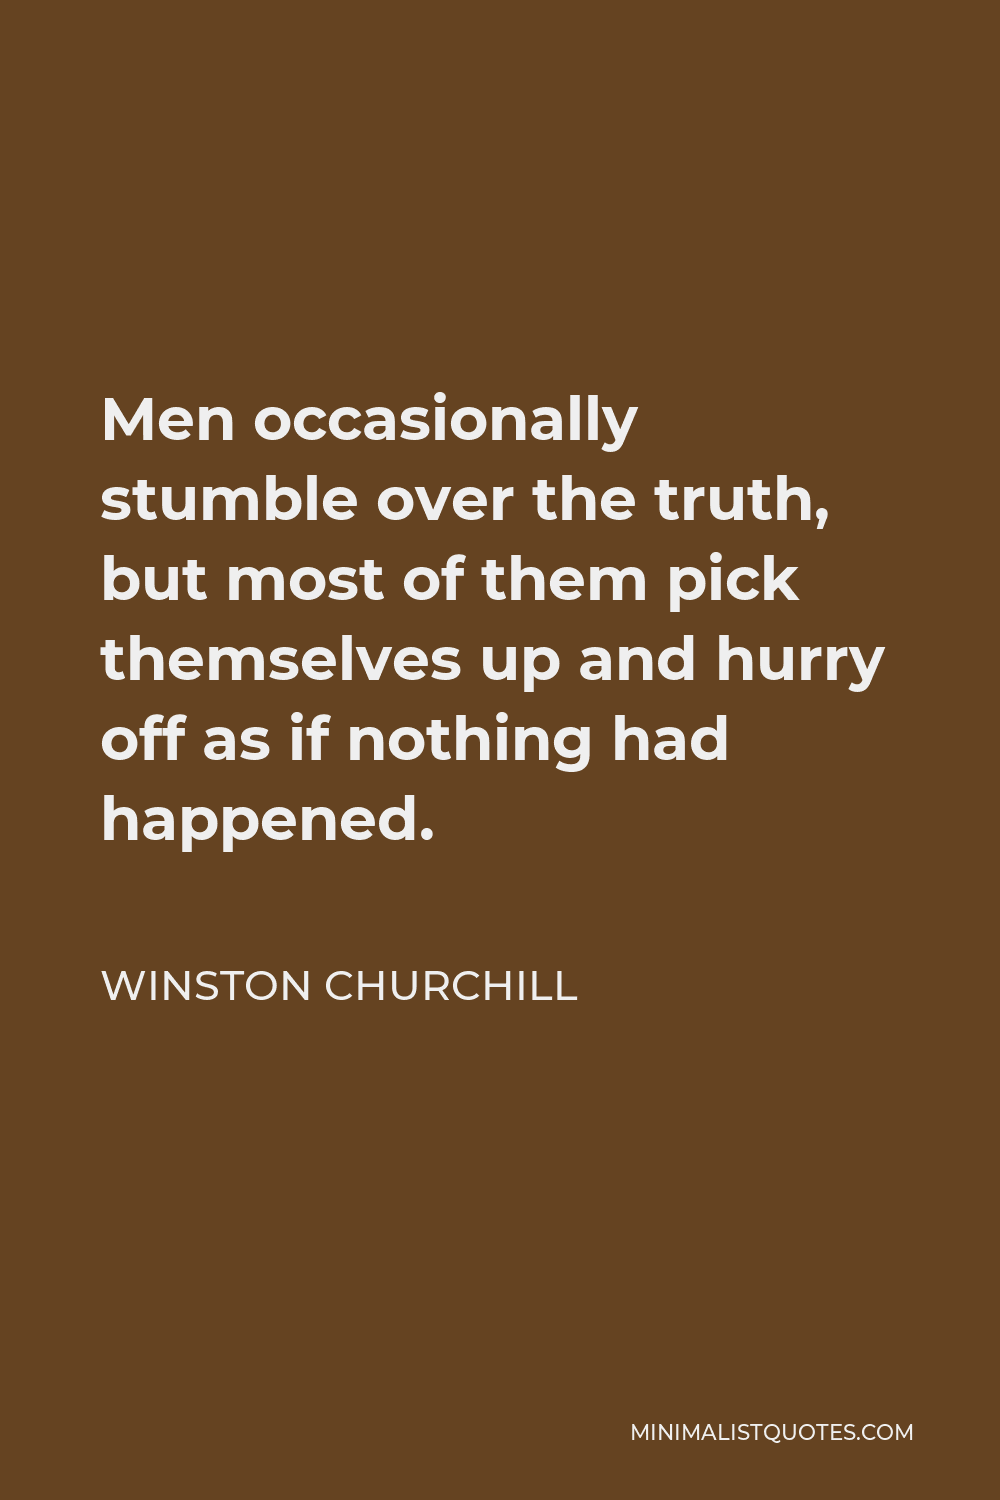 Winston Churchill Quote - Men occasionally stumble over the truth, but most of them pick themselves up and hurry off as if nothing had happened.